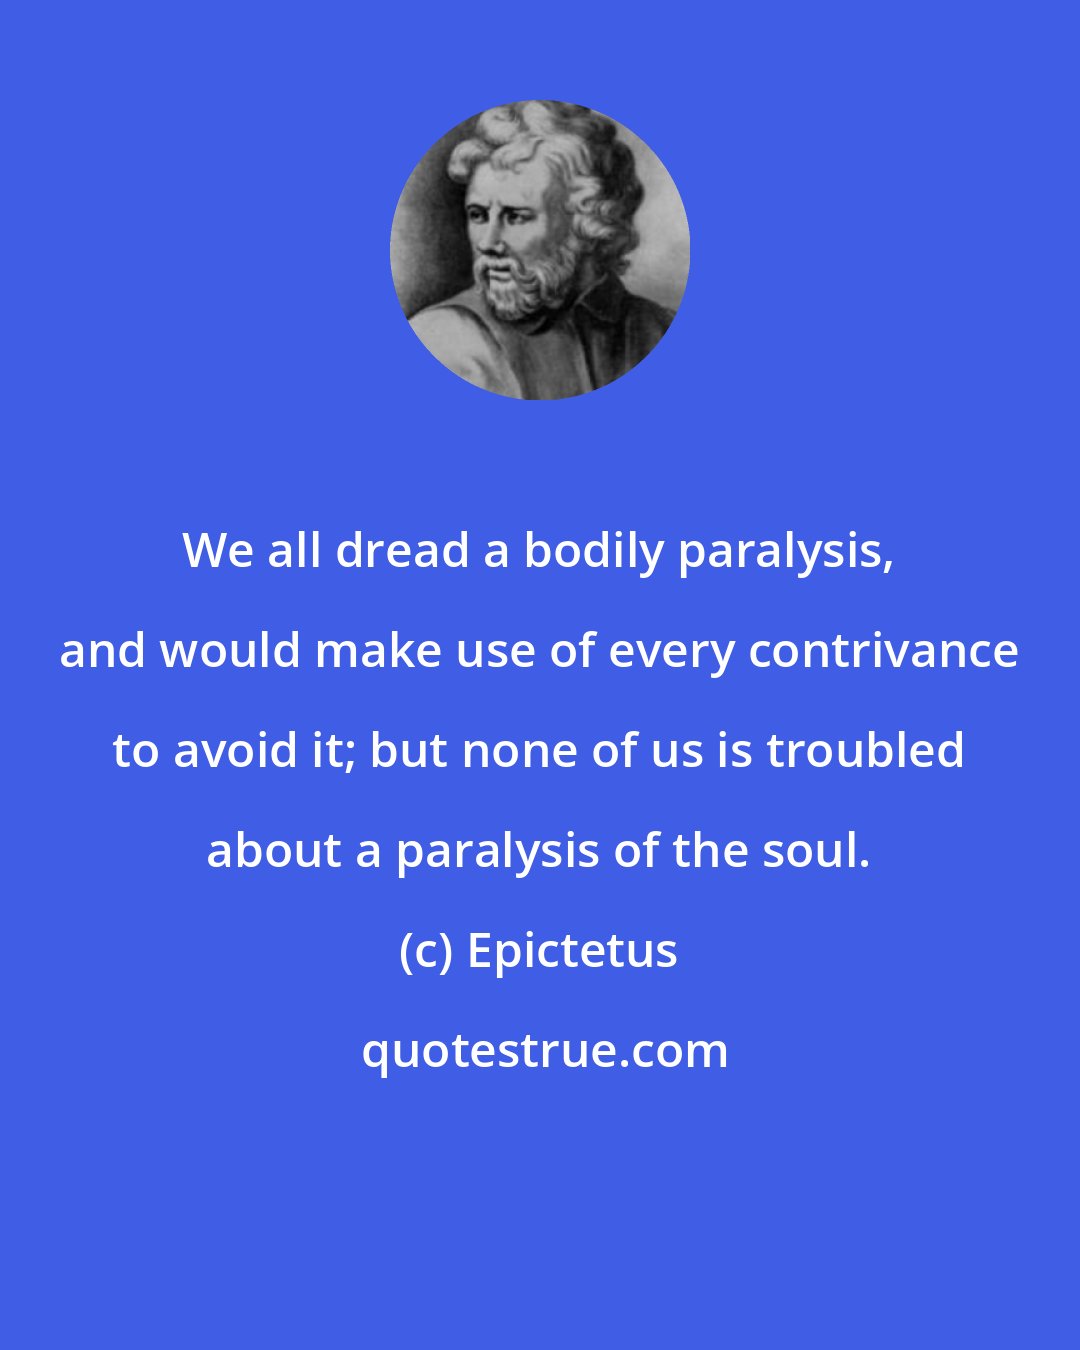 Epictetus: We all dread a bodily paralysis, and would make use of every contrivance to avoid it; but none of us is troubled about a paralysis of the soul.